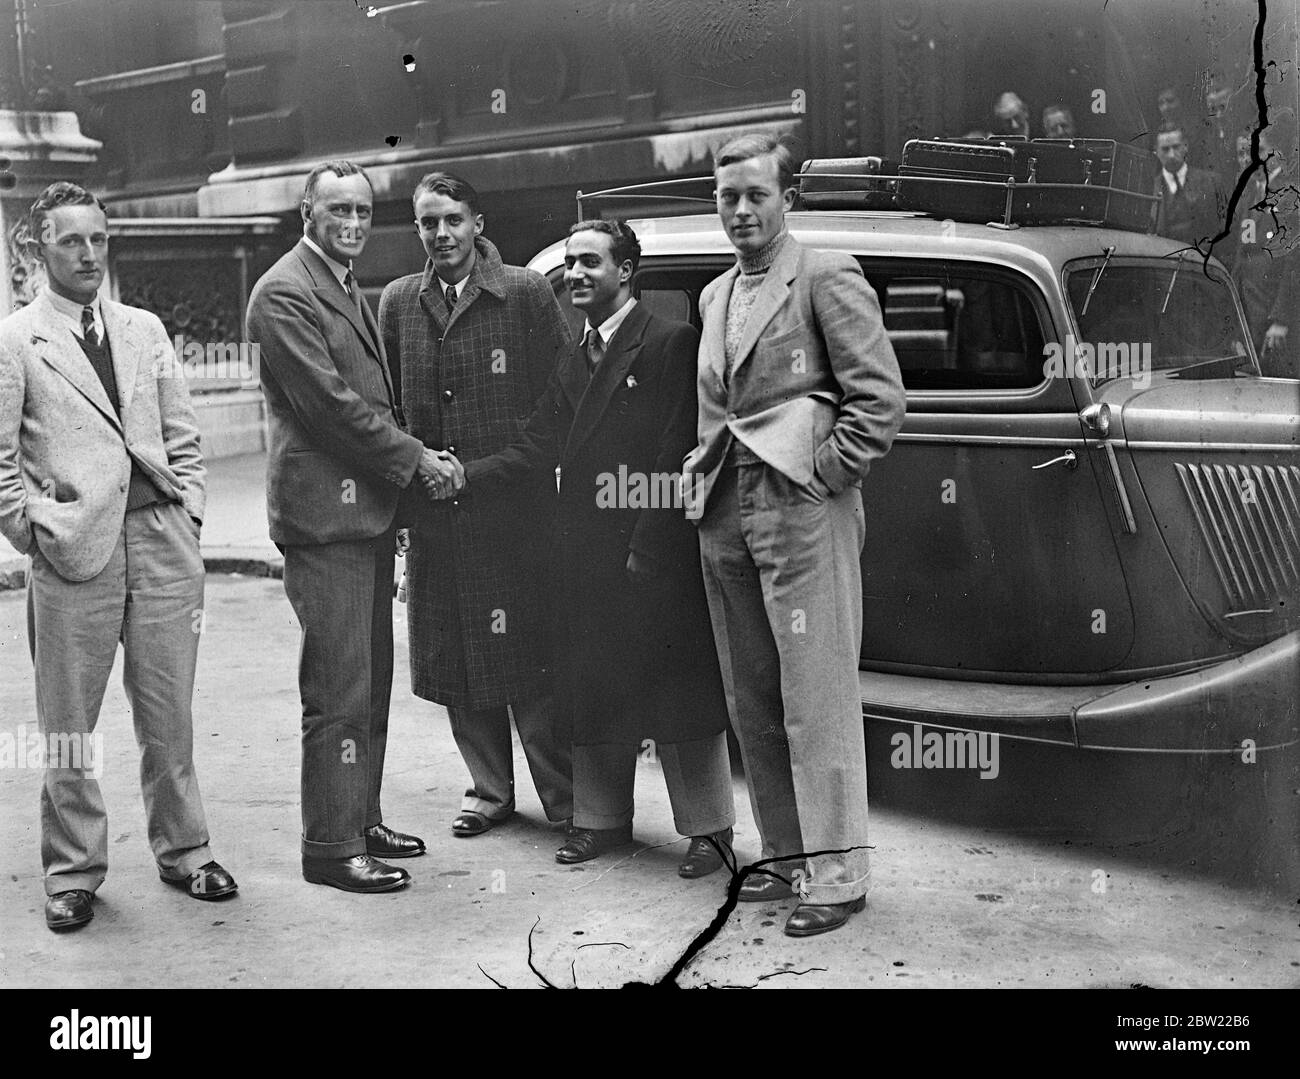 Four English boys began their new career in adventurous style when they left the India Office in London to travel by car all the way to Calcutta take up positions in the Indian Civil Service. S. K. Brown (second from left) Assistant Under-Secretary for India shaking hands with the boys as they left London (left to right): A W Flack, T. N. Kaul, F. A. Sharpe and P. F. Adams loading their car with petrol before leaving London. 21 September 1937. Stock Photo